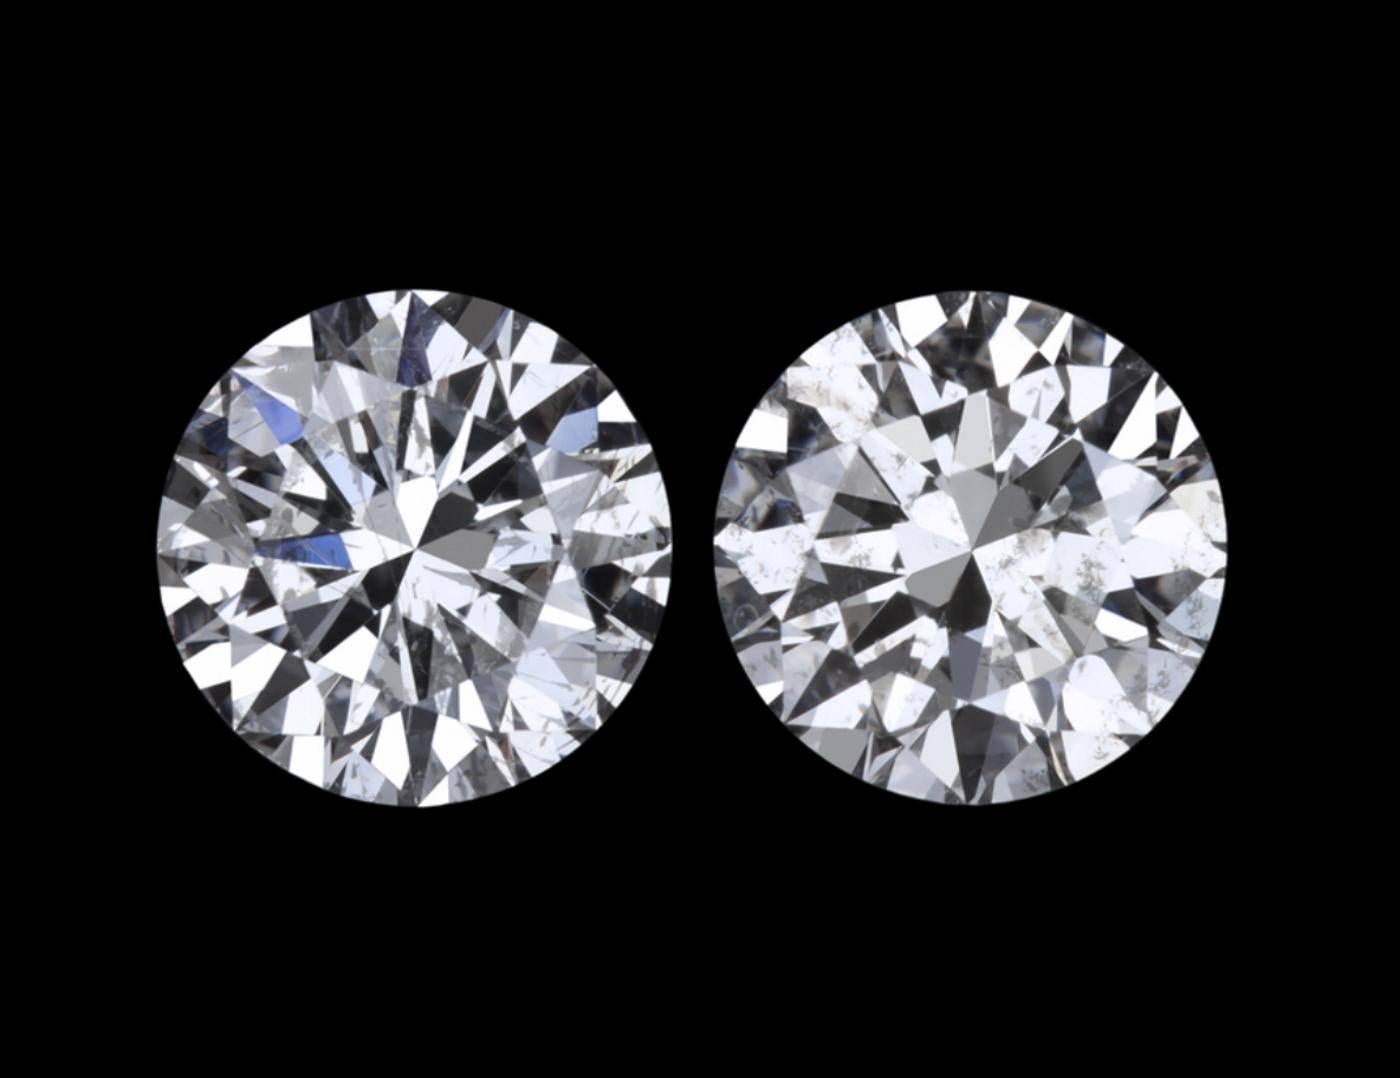 This amazing  2.09 carat matched pair of round brilliant cut natural diamonds are eye clean, brilliantly white, and have dazzling sparkle! Measuring 6.5mm in diameter, the diamonds have great spreads and a larger than typical look for their weight.